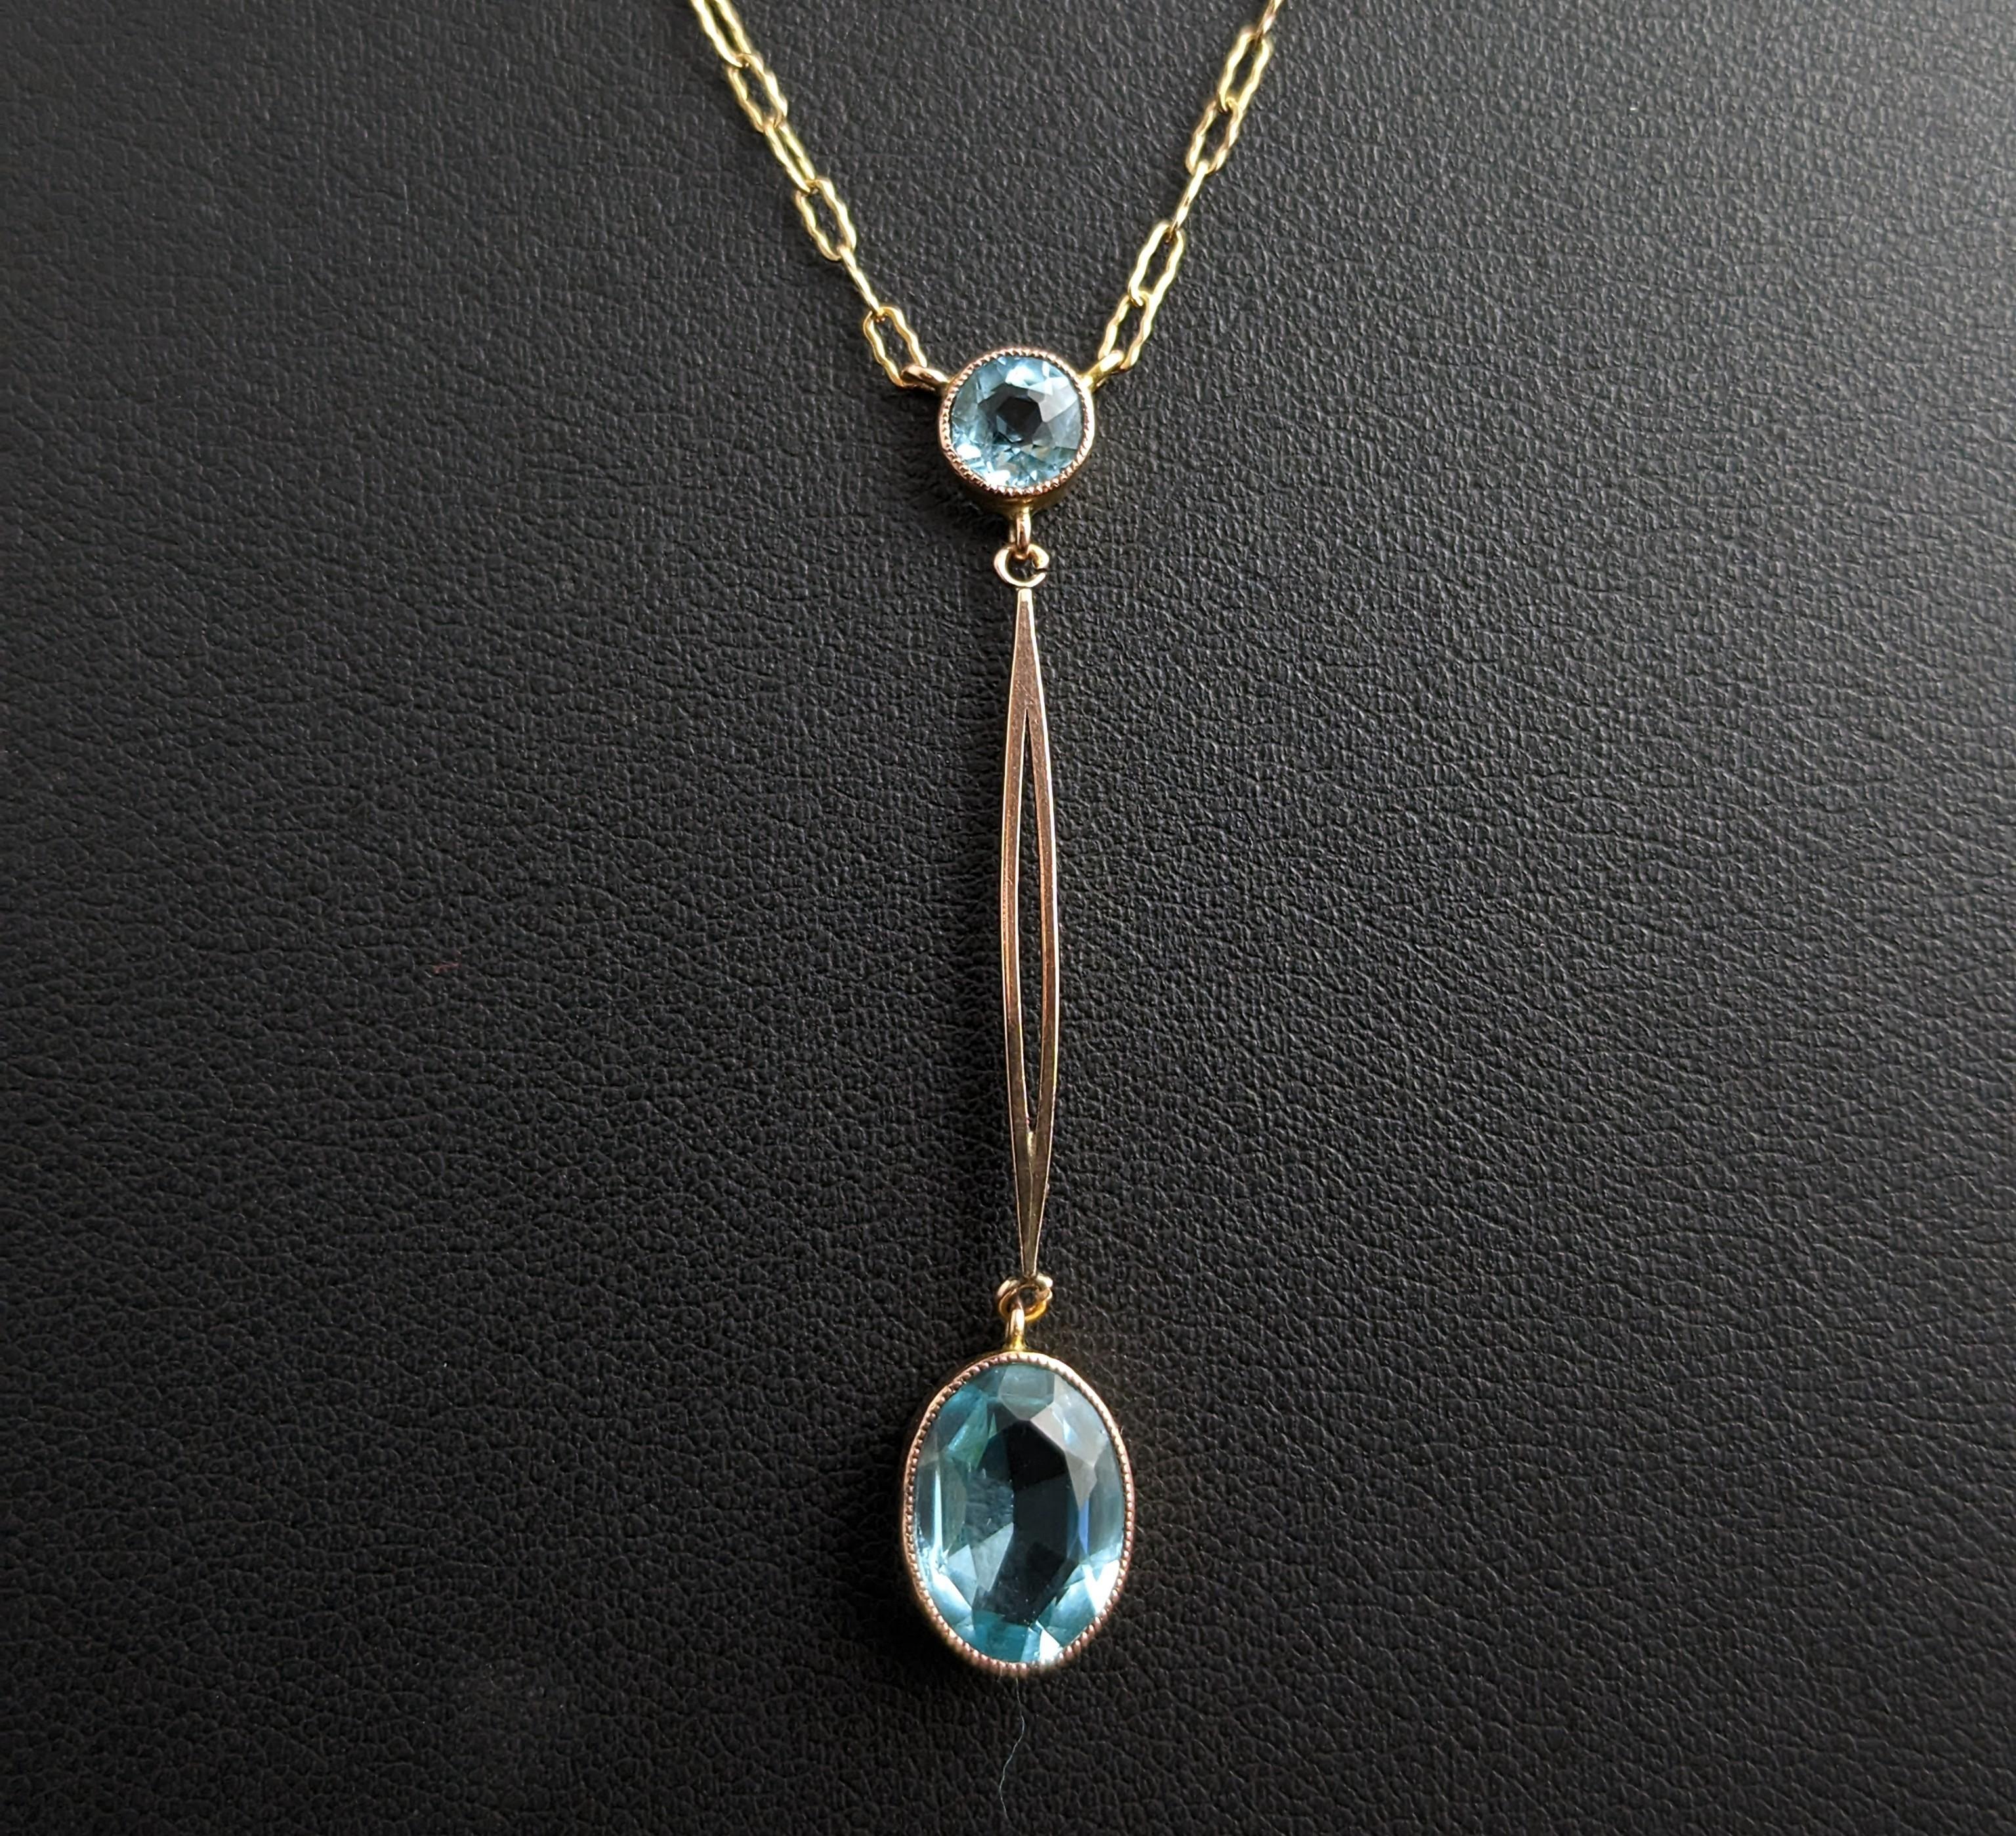 This beautiful Antique Art Deco 9kt Rose and yellow gold, blue paste drop pendant necklace is so feminine and pretty.

The pendant has a round cut vibrant blue paste to the top intercepted by a rose gold split bar drop, from here there is a